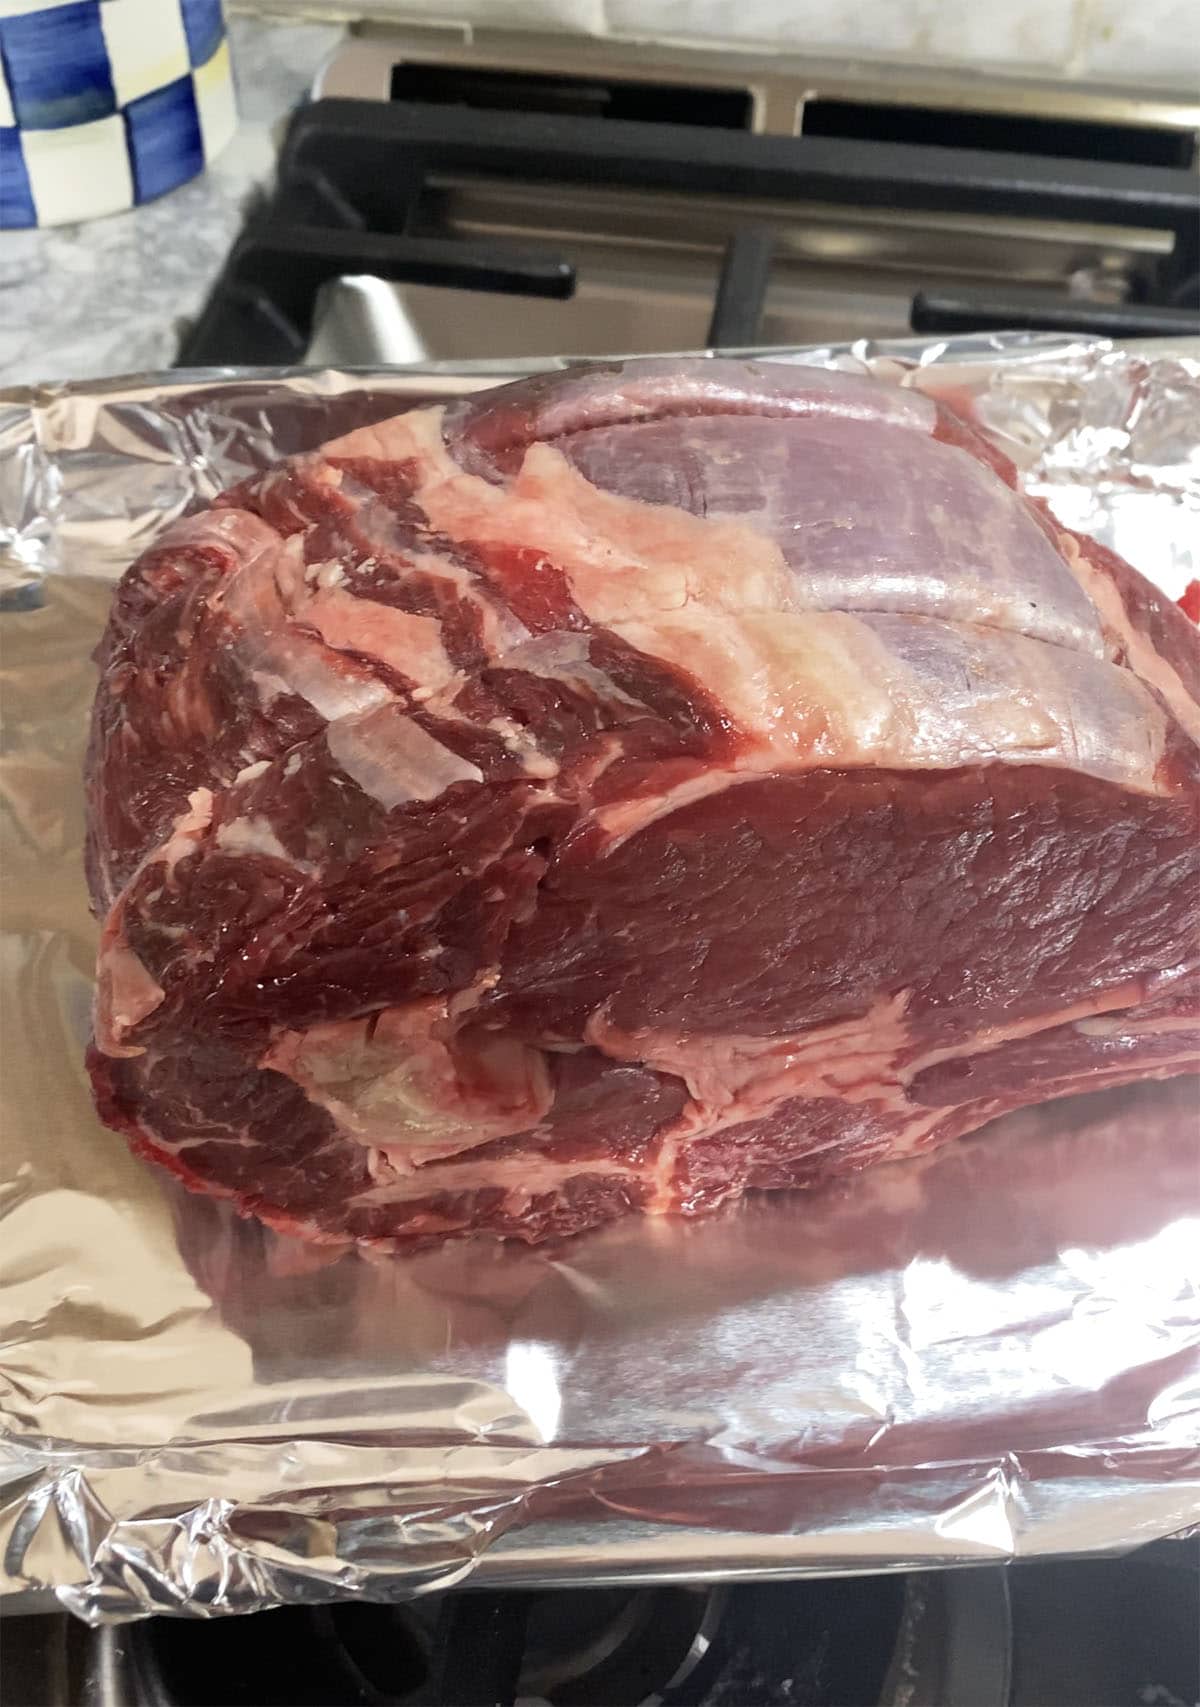 A large cut of uncooked prime rib is placed on a prepared baking dish.